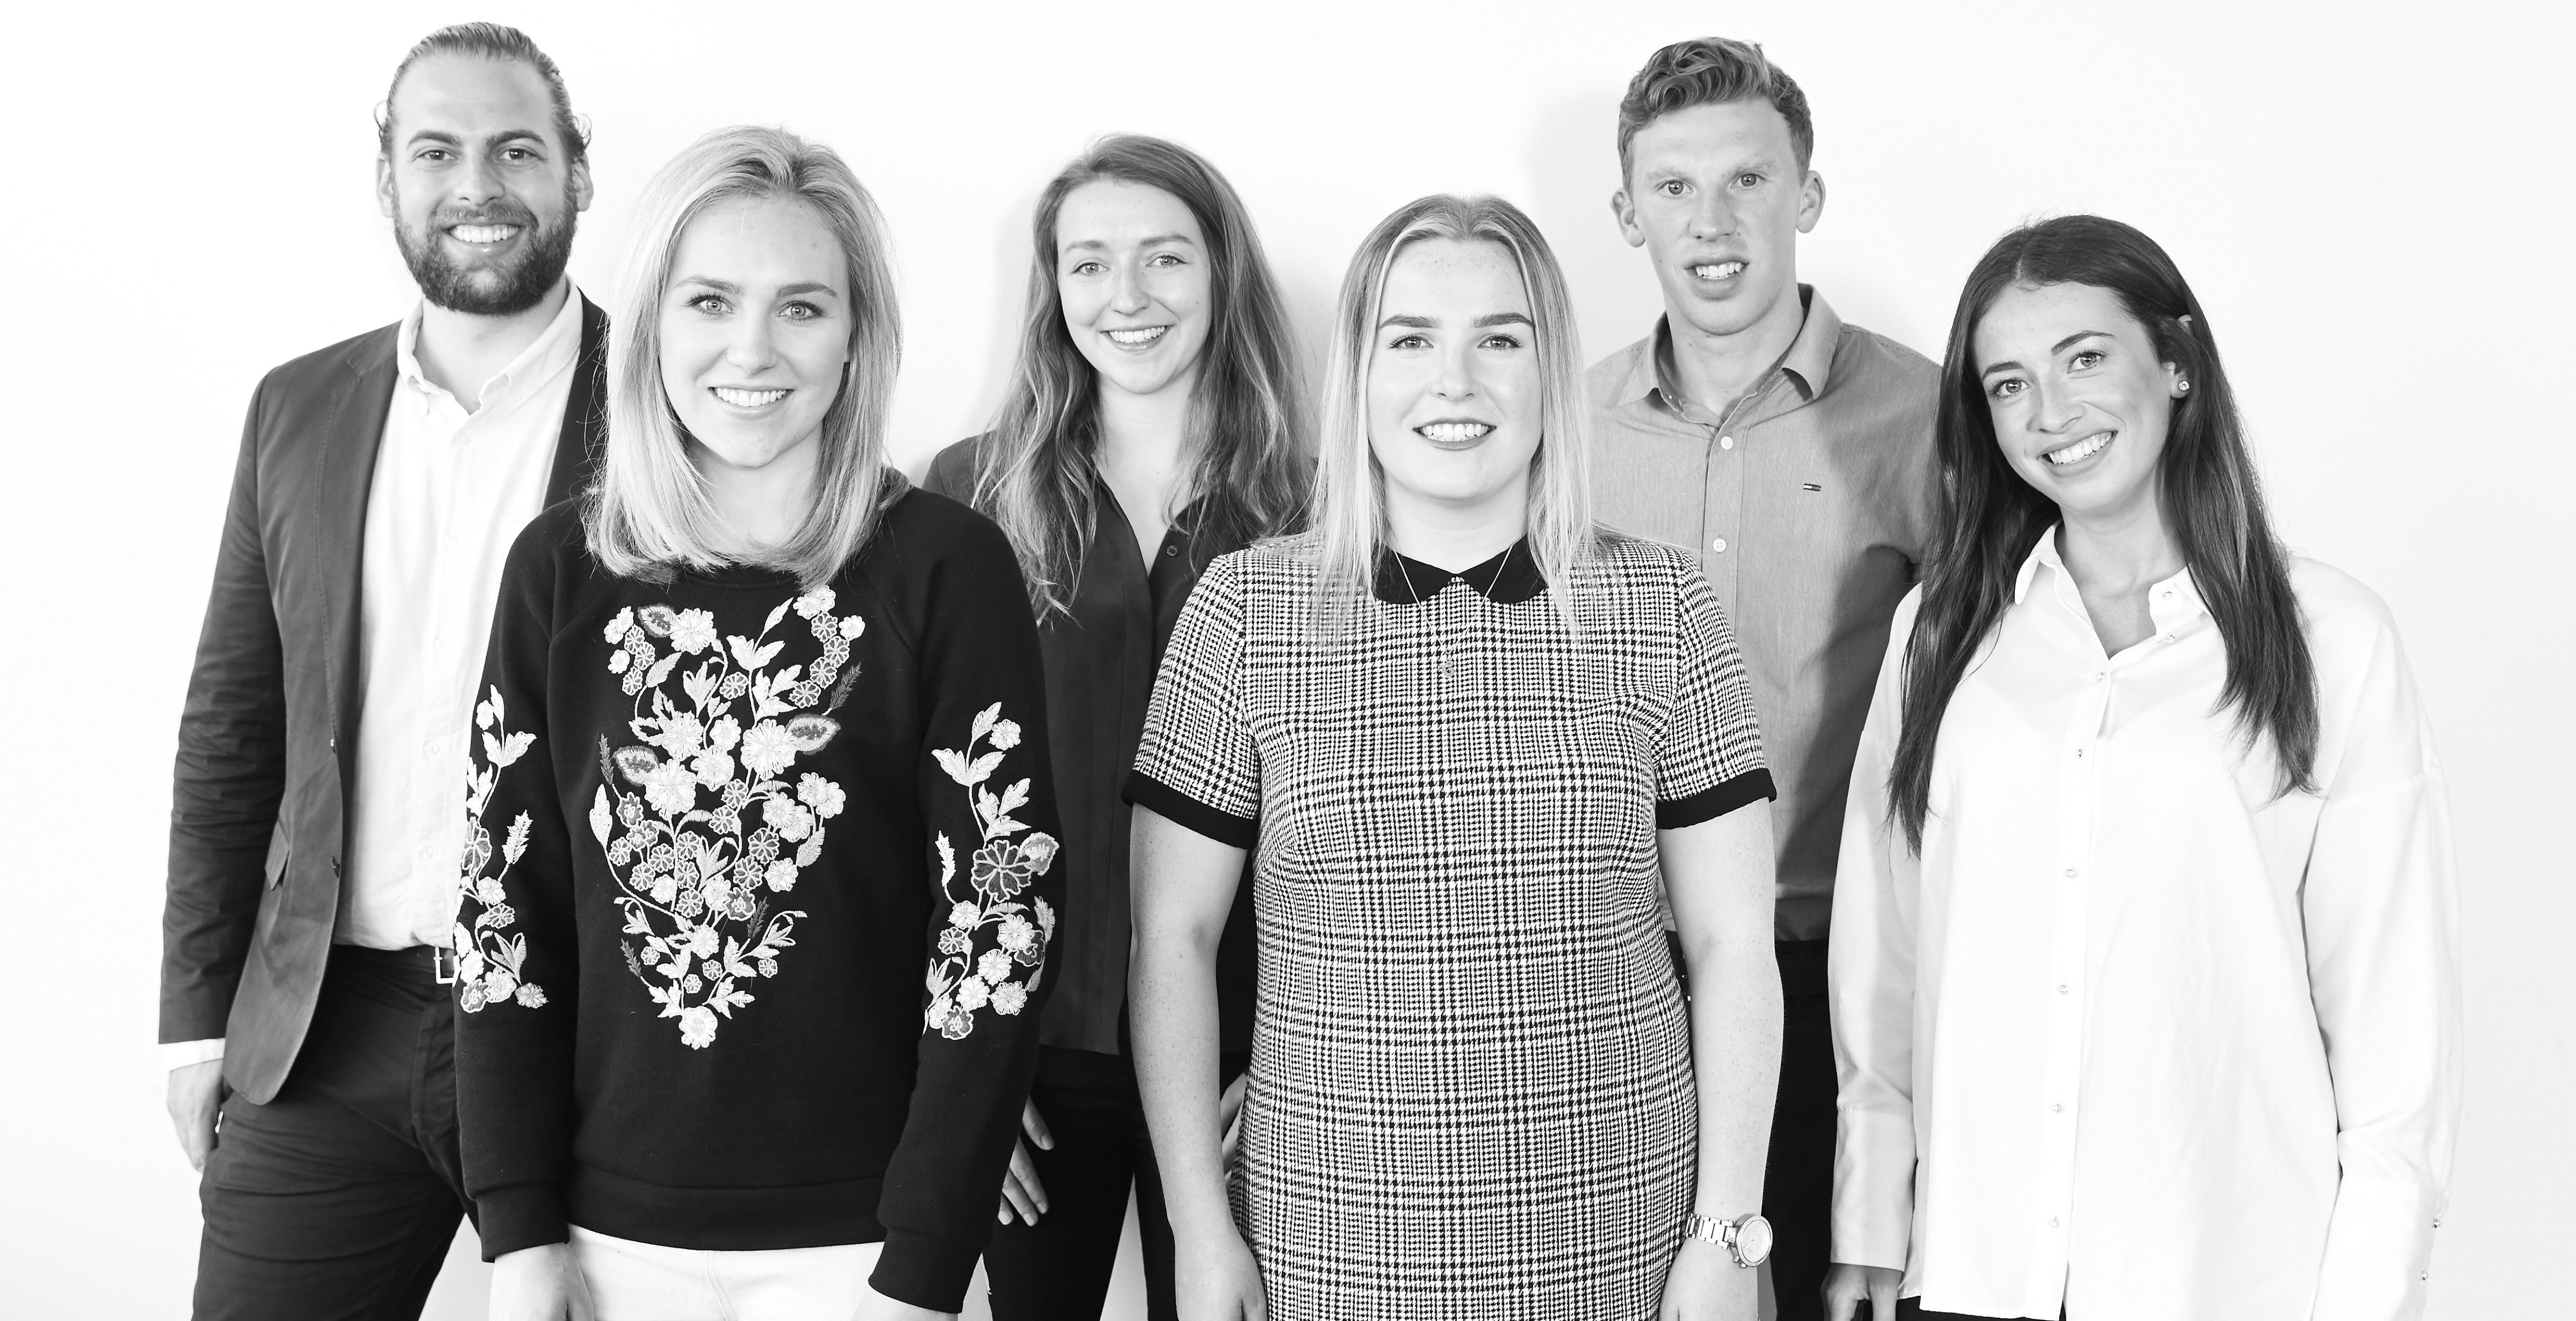 Eight tips from our graduates on how to make the most of life at Pentland